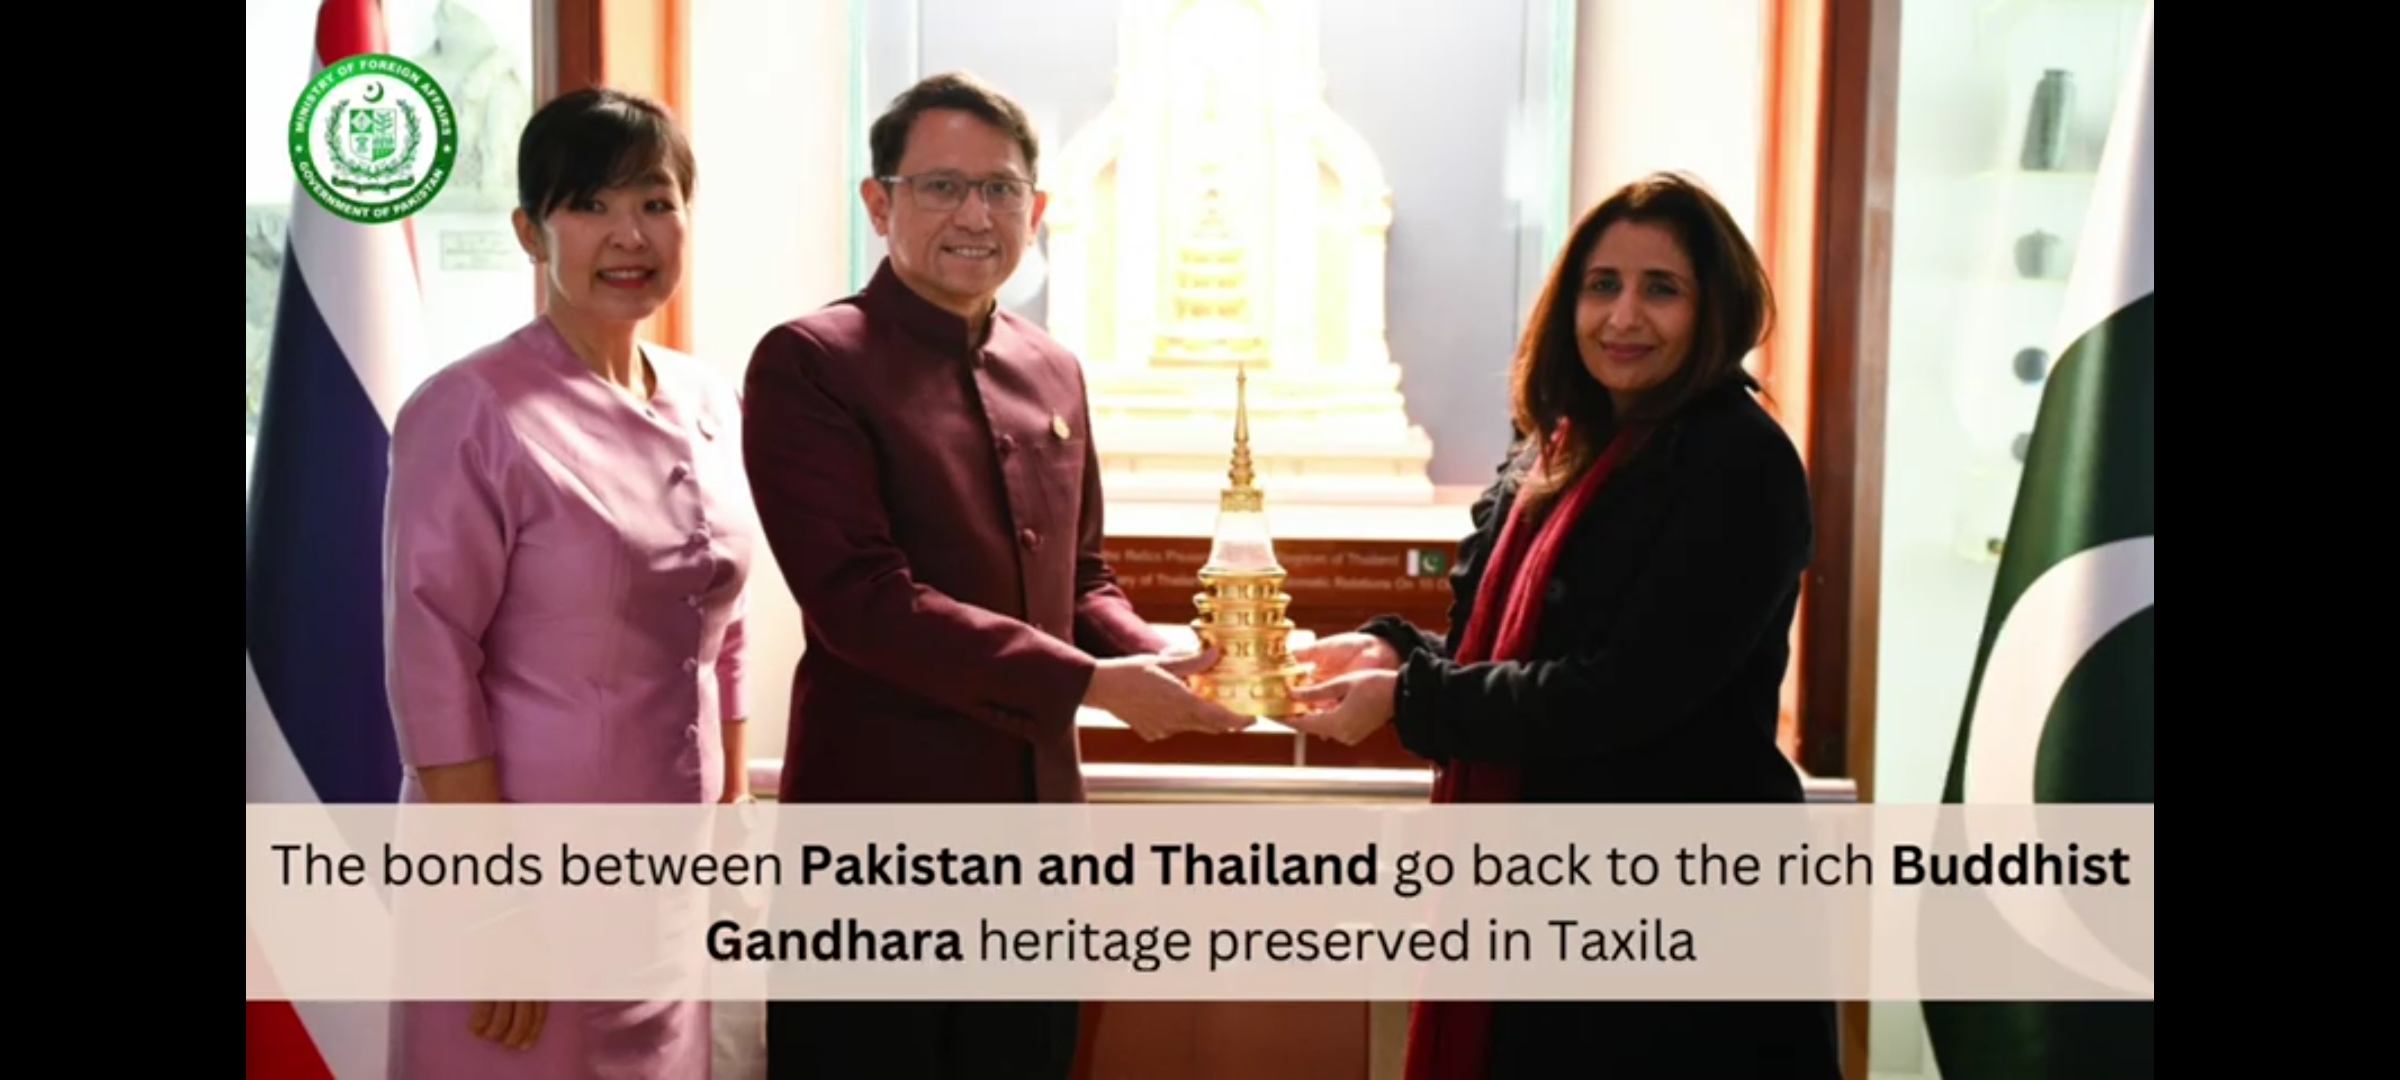 Thailand gifts Taxila museum container for Buddha's bone relics